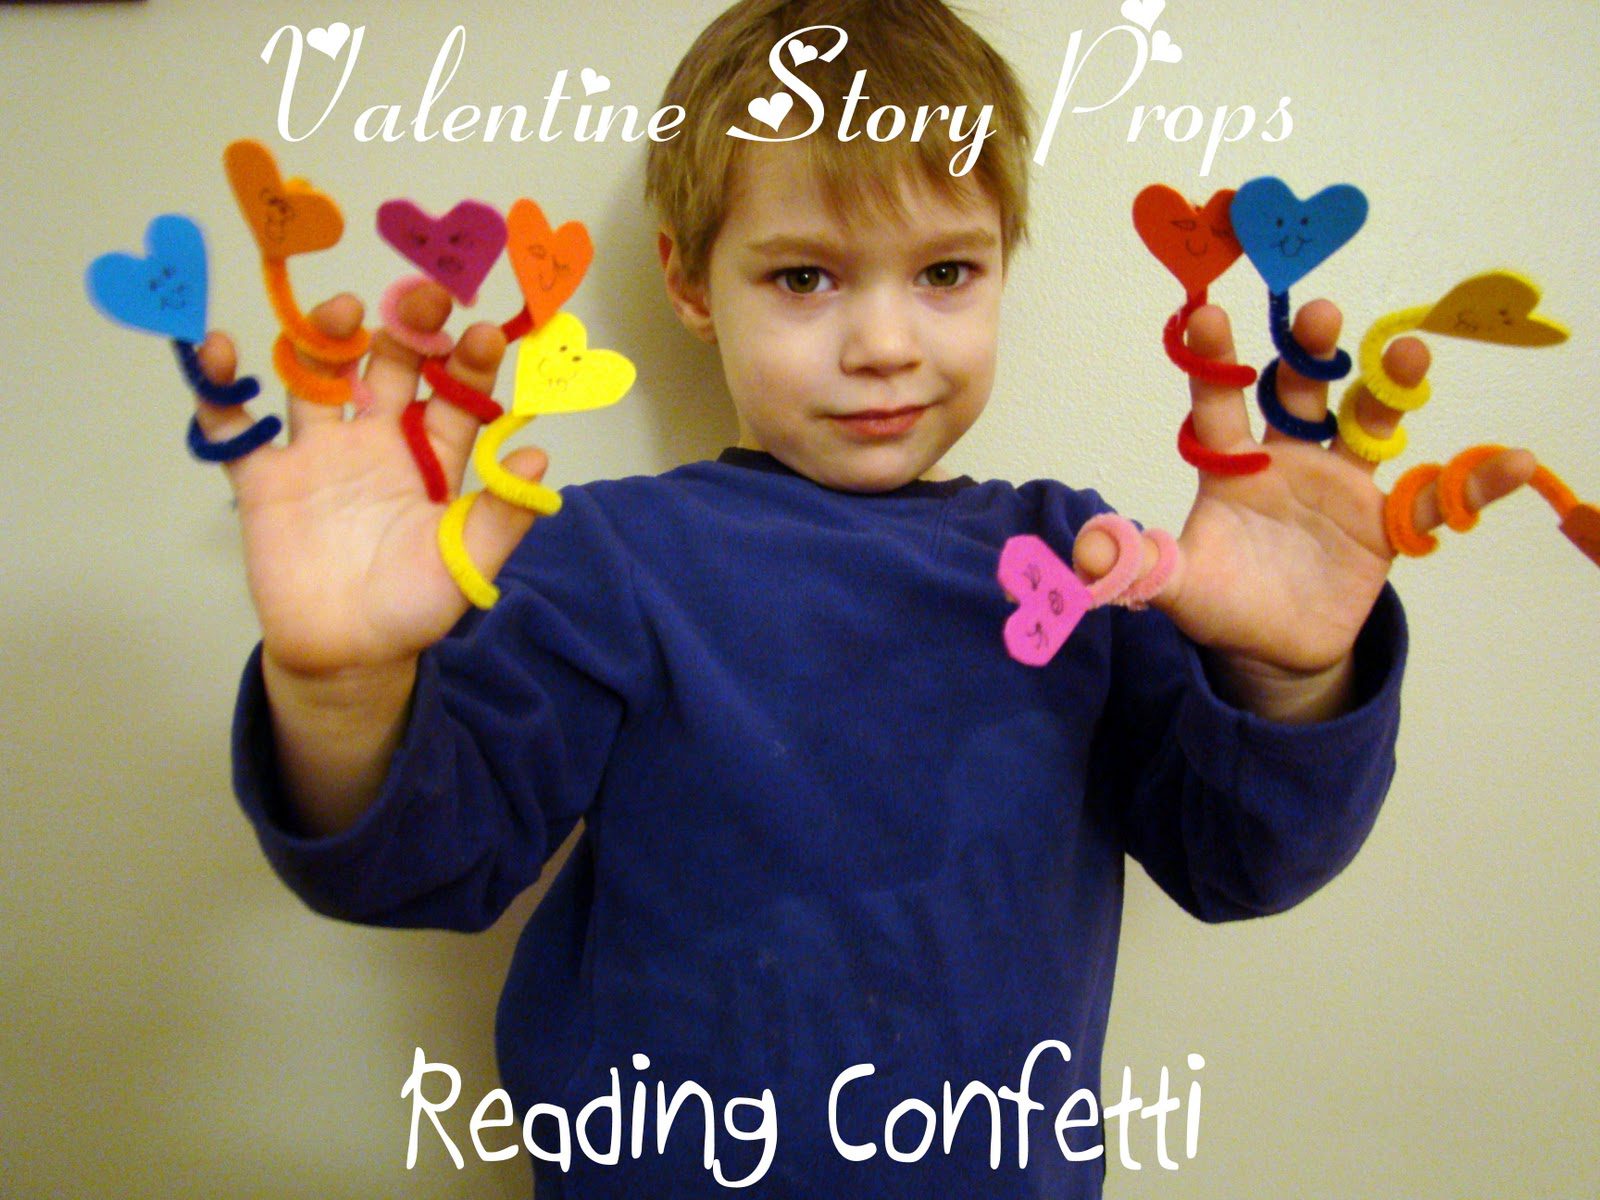 A little boy is shown with "puppets" On his fingers that are made of twisted pipe cleaners and foam hearts with faces drawn on them.